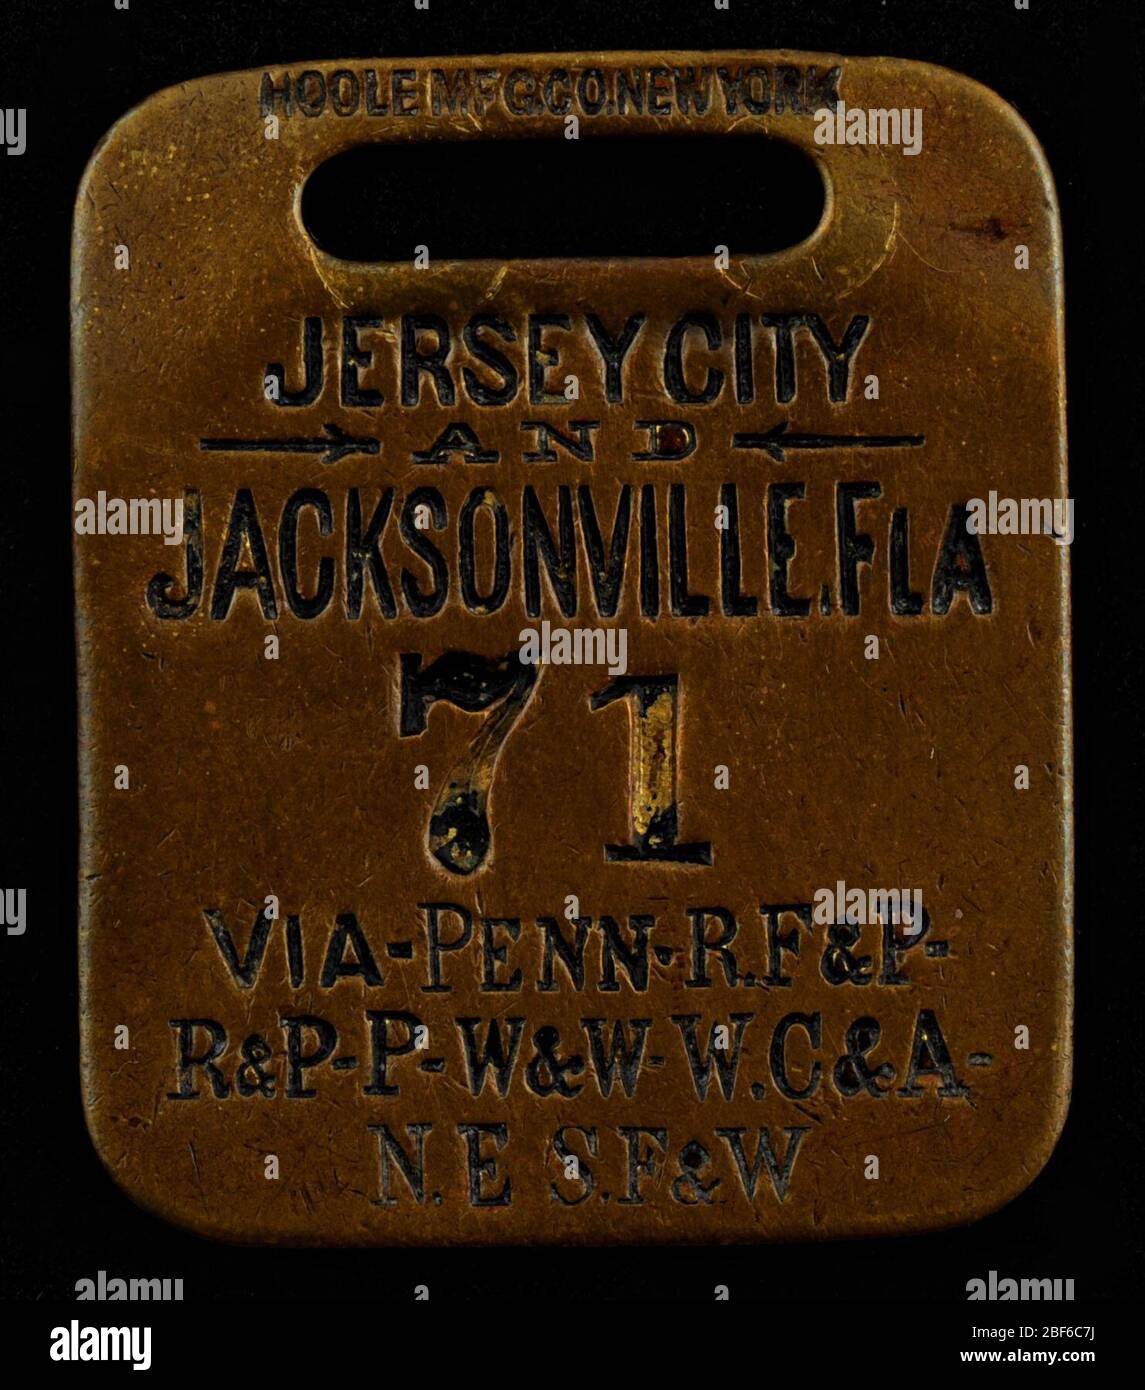 new jersey to jacksonville florida